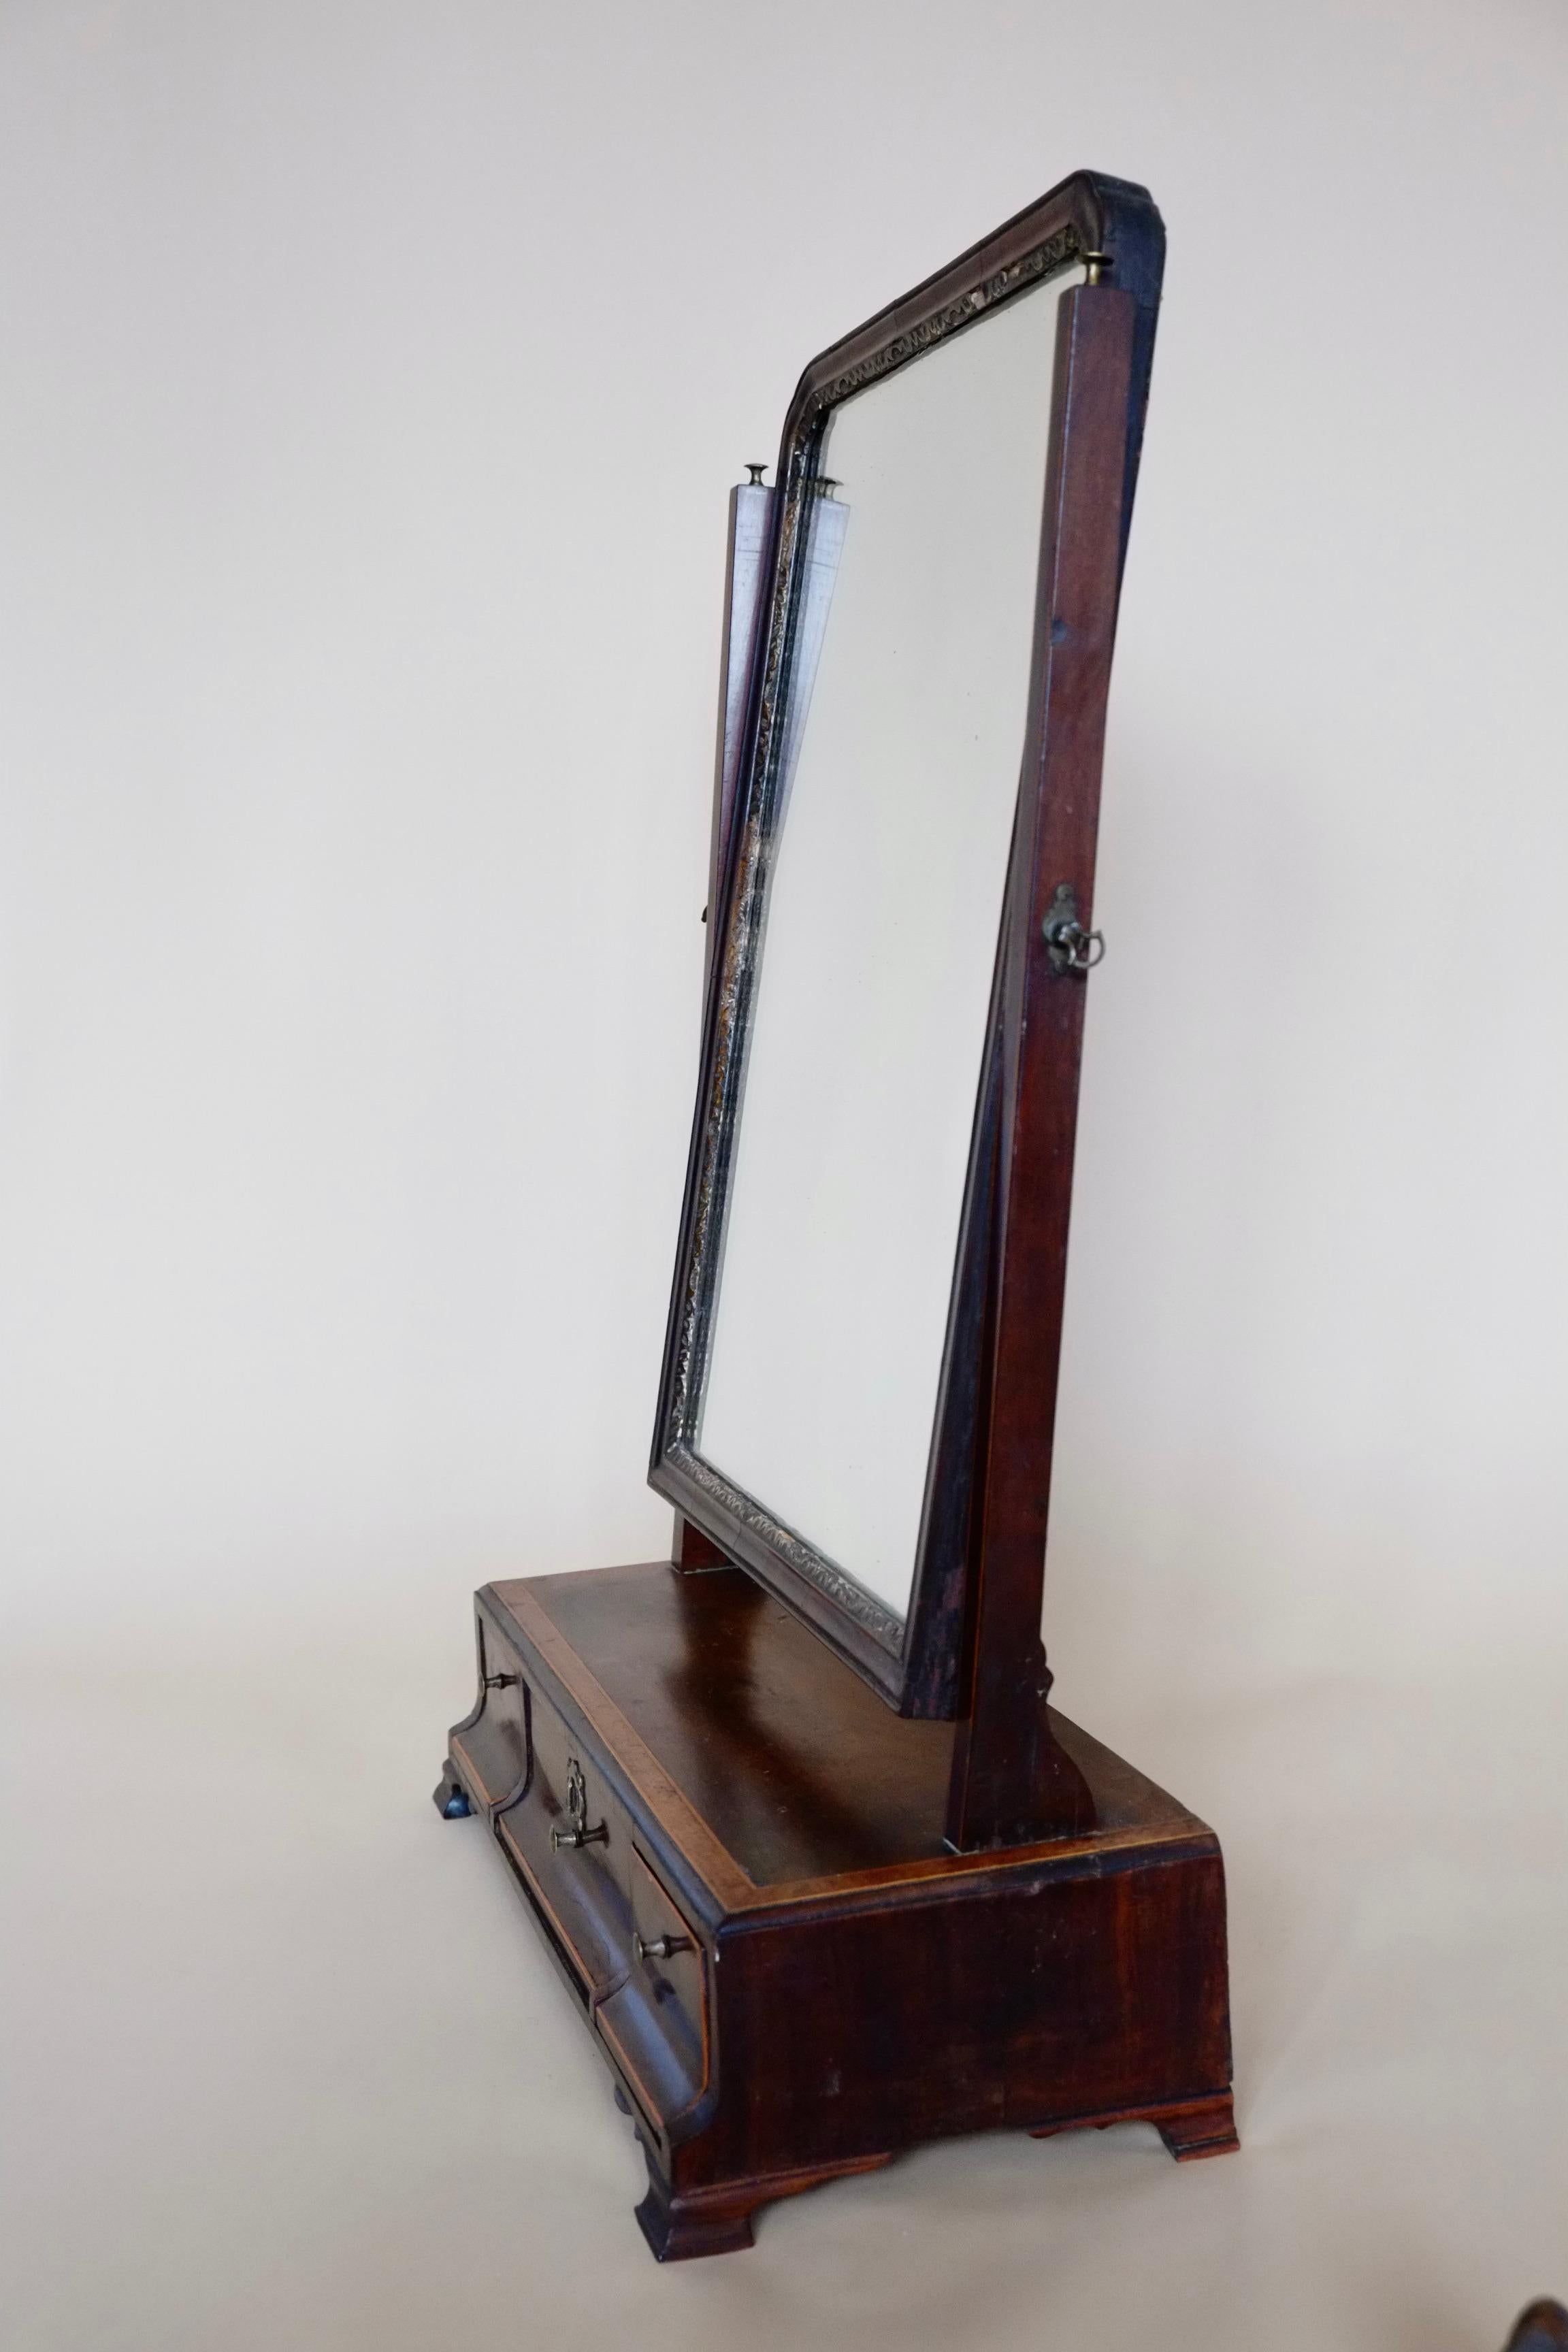 This is an antique English dressing table mirror. Georgian mahogany vanity mirror dating to circa 1800. A very handsome dressing mirror made in a rich mahogany with the most beautiful flamed burl maple inlay. The mirror plate is in very good order,